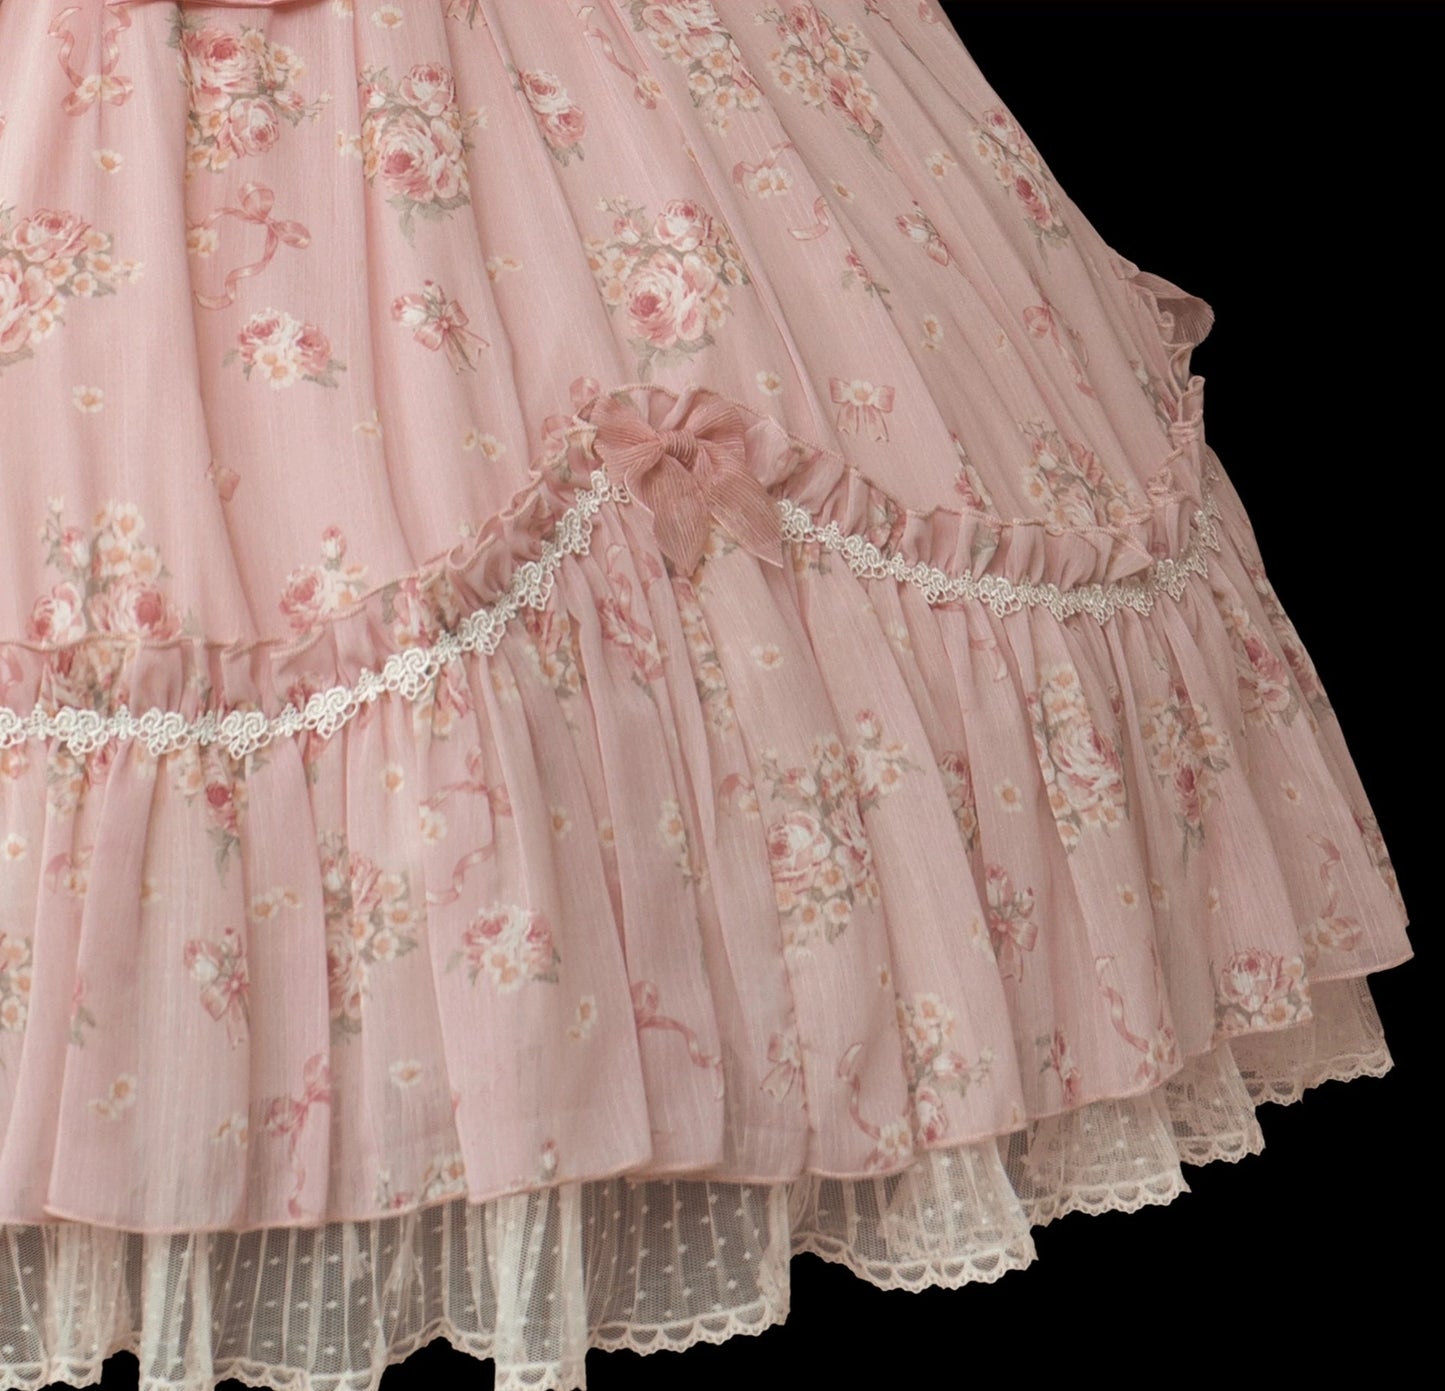 [Pre-orders available until 4/28] Daydream Rosa Classical rose-patterned dress